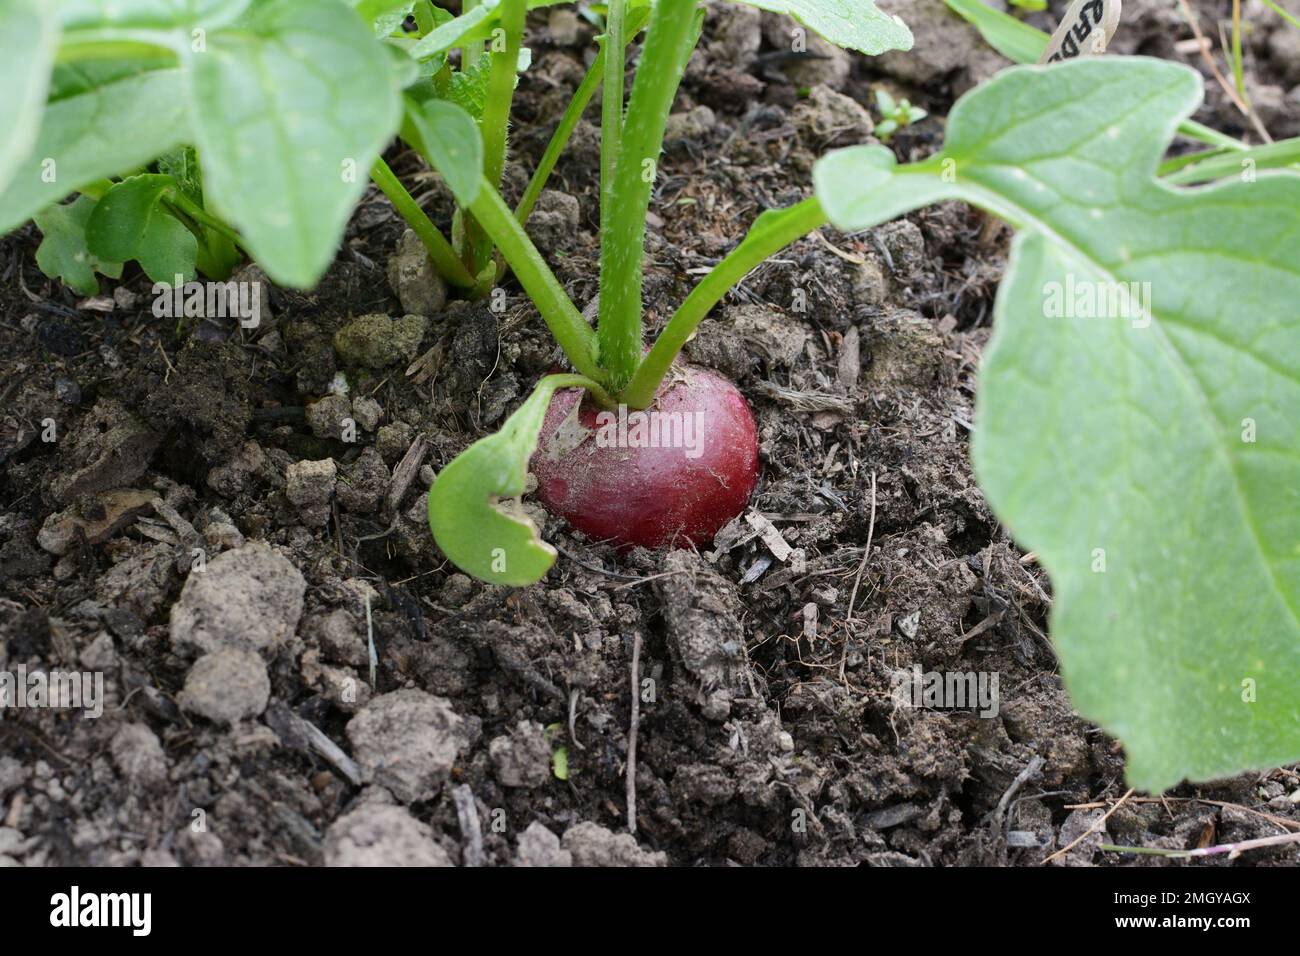 Single red radish growing in the soil of a vegetable bed, ready for harvest Stock Photo